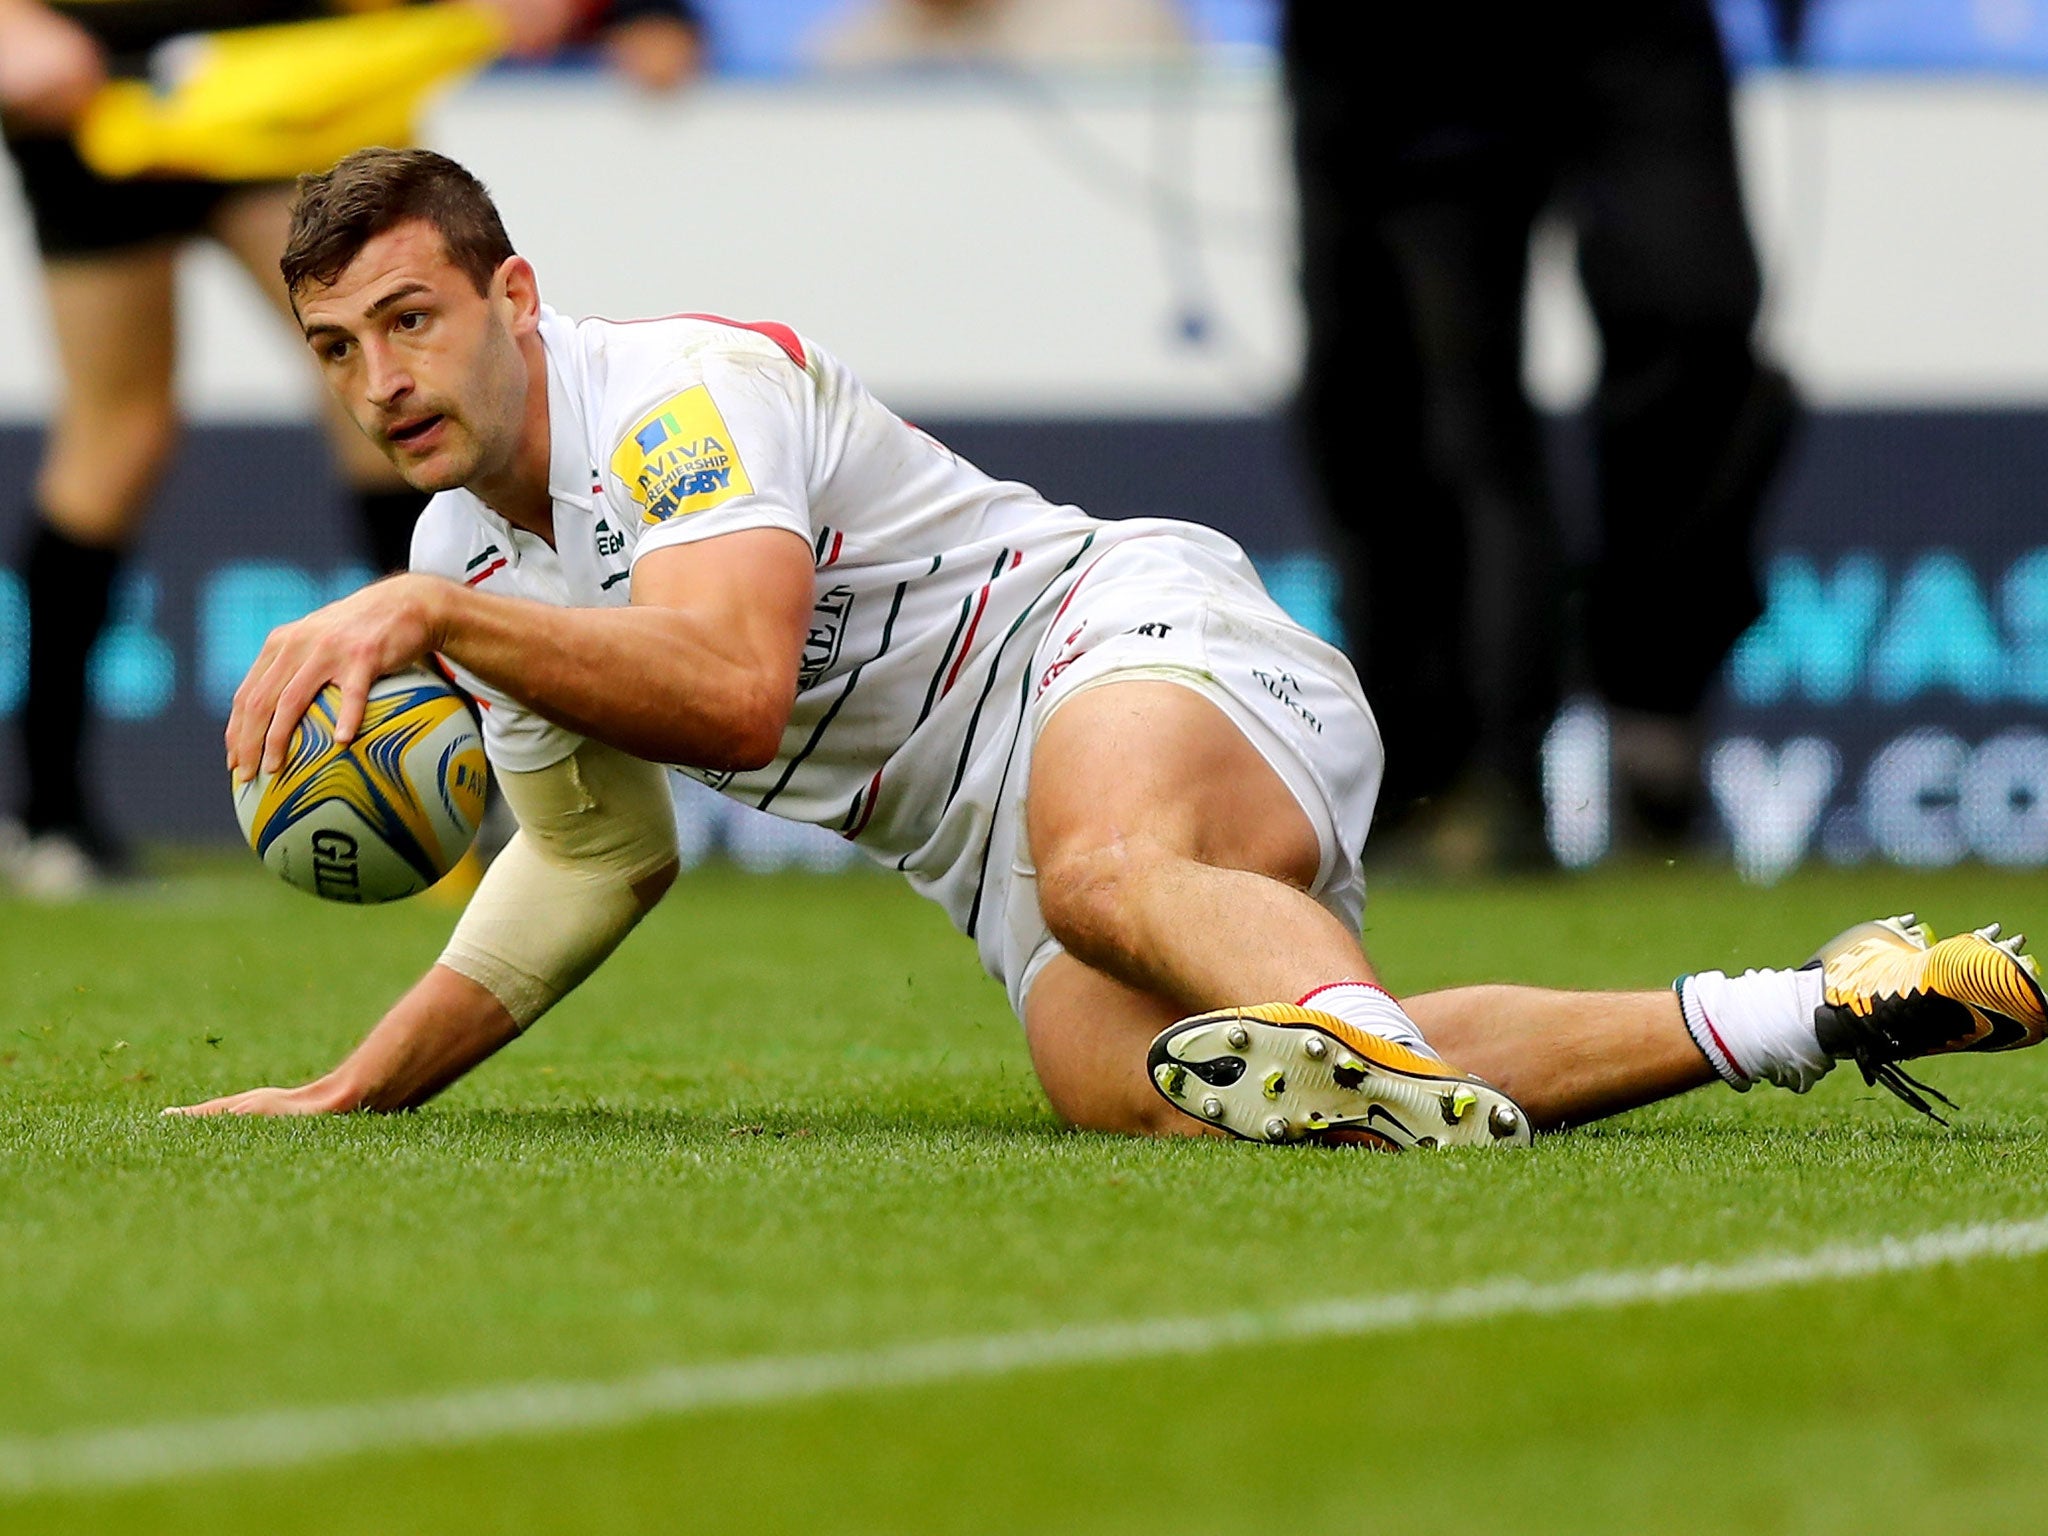 Jonny May has now scored six tries in as many games